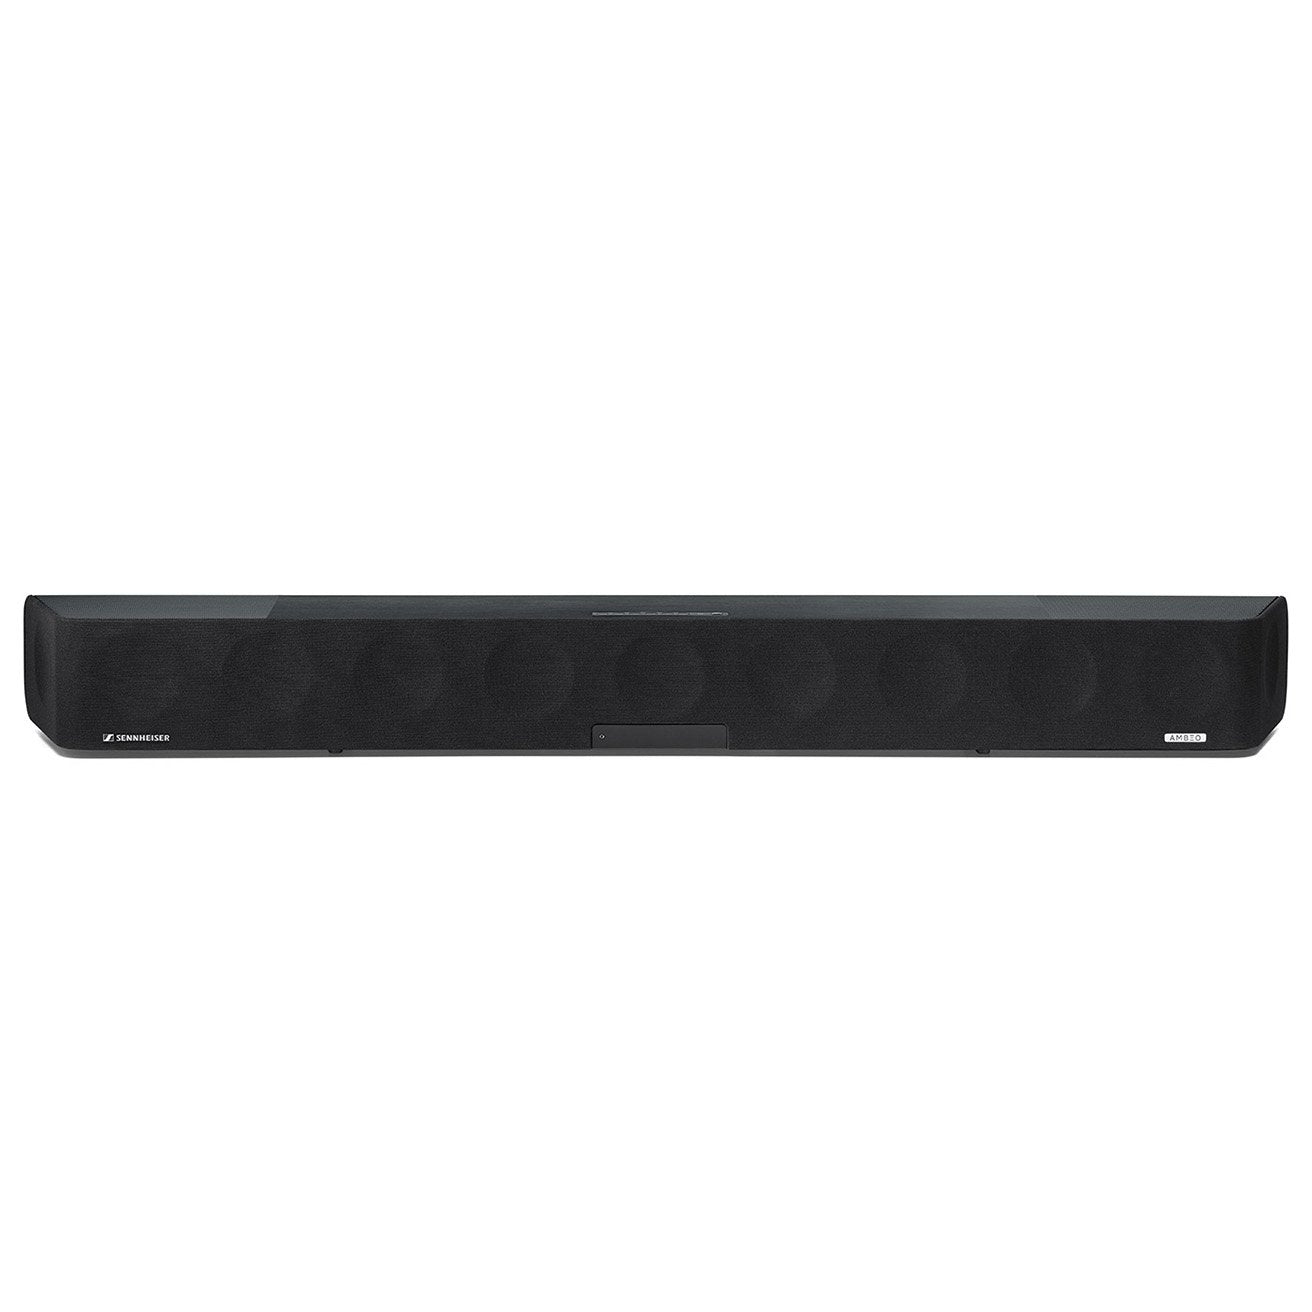 Sennheiser AMBEO Max Soundbar - 5.1.4 Channel with Dolby Atmos and DTS:X - image 2 of 9